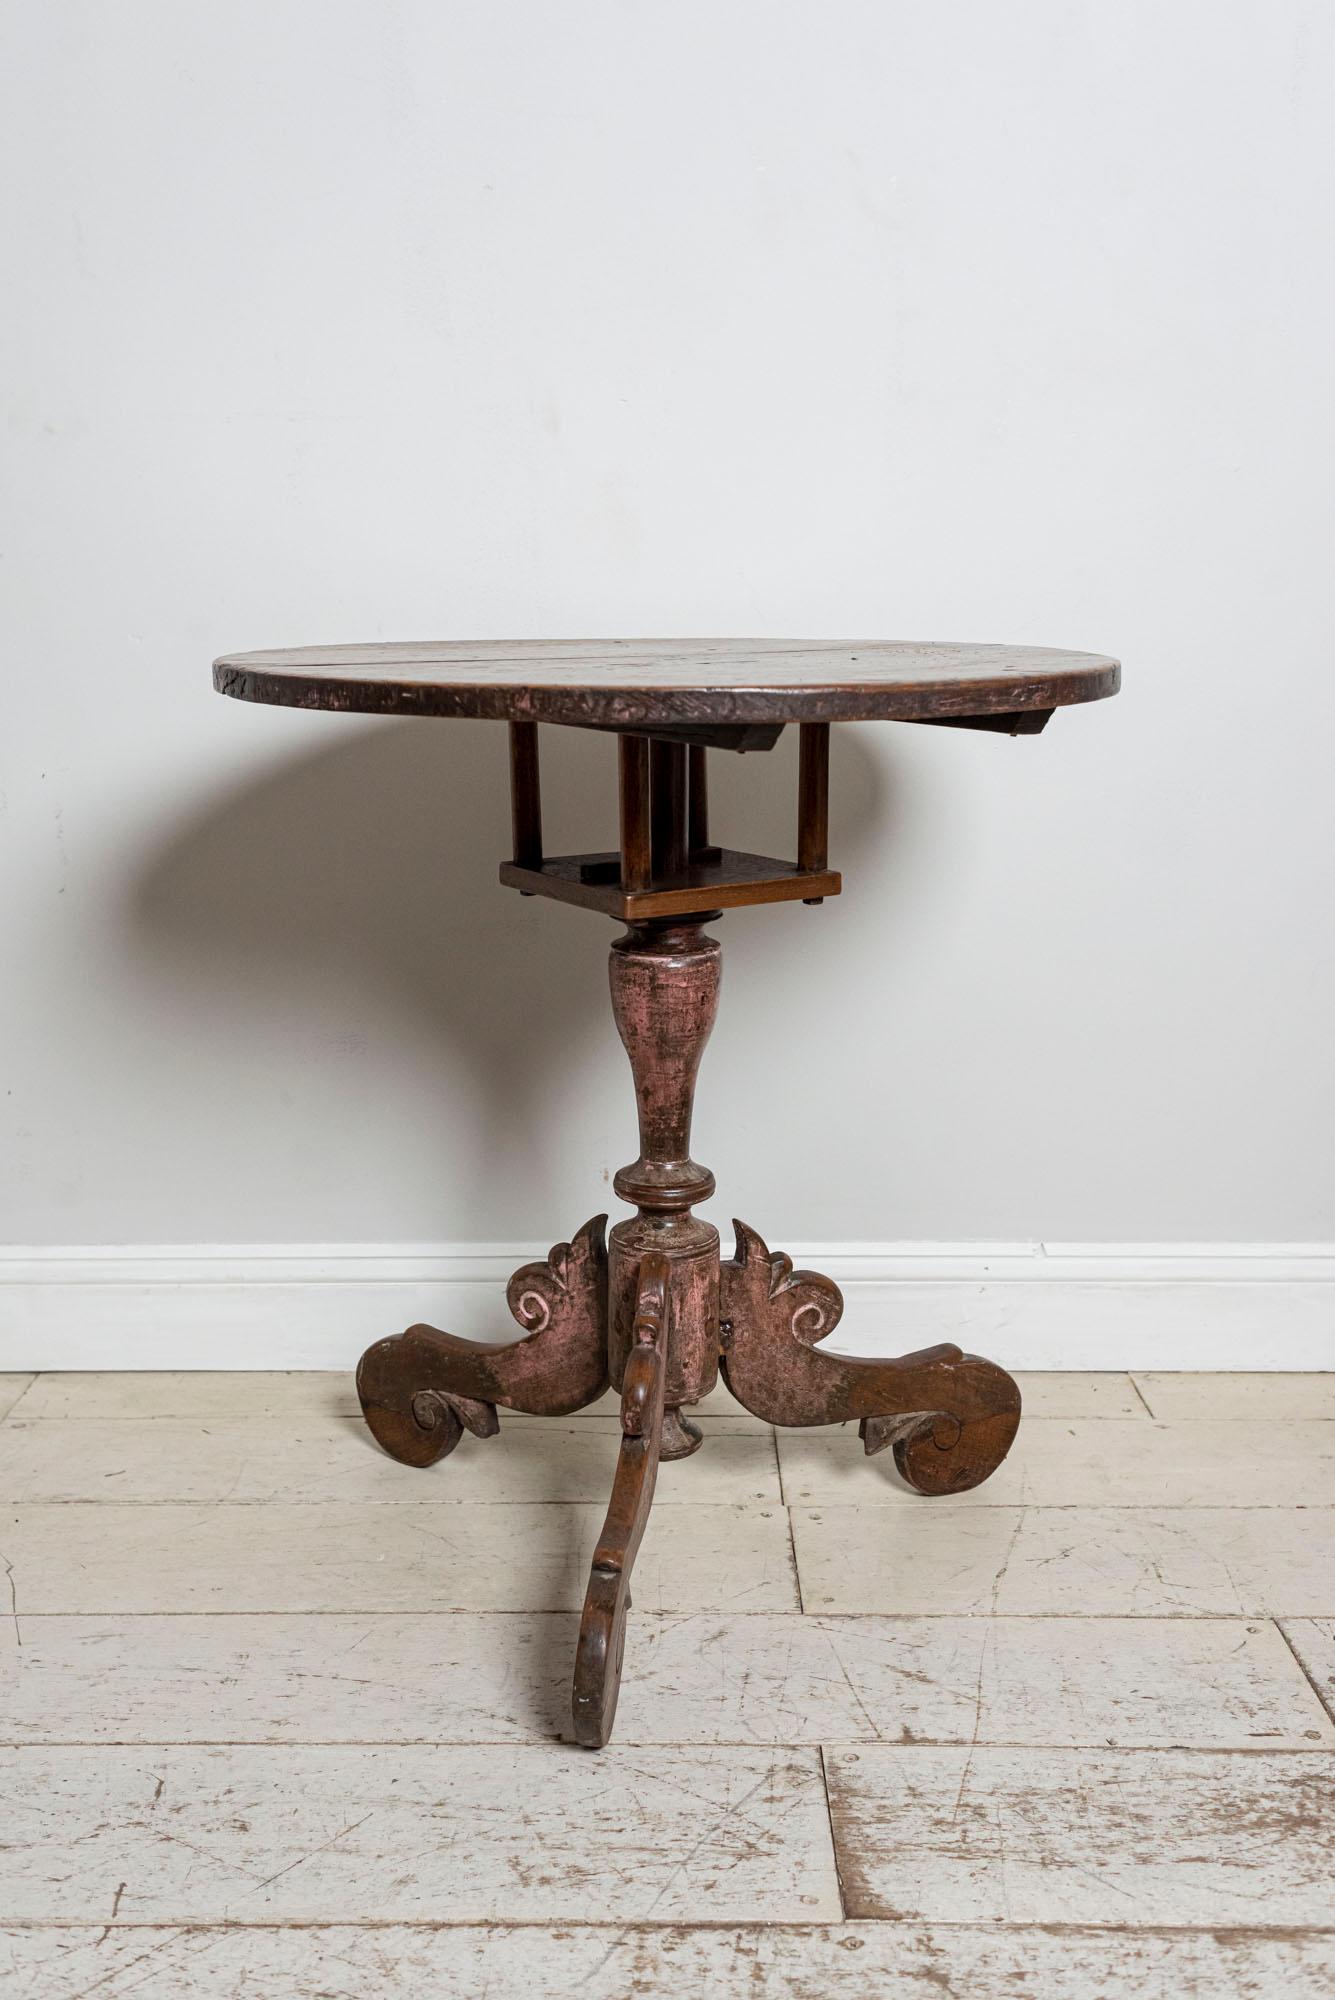 18th century side table, with a birdcage under tier and scrolled detail tripod base.
We believe the table to be Norwegian.

A good size solid useful side table.